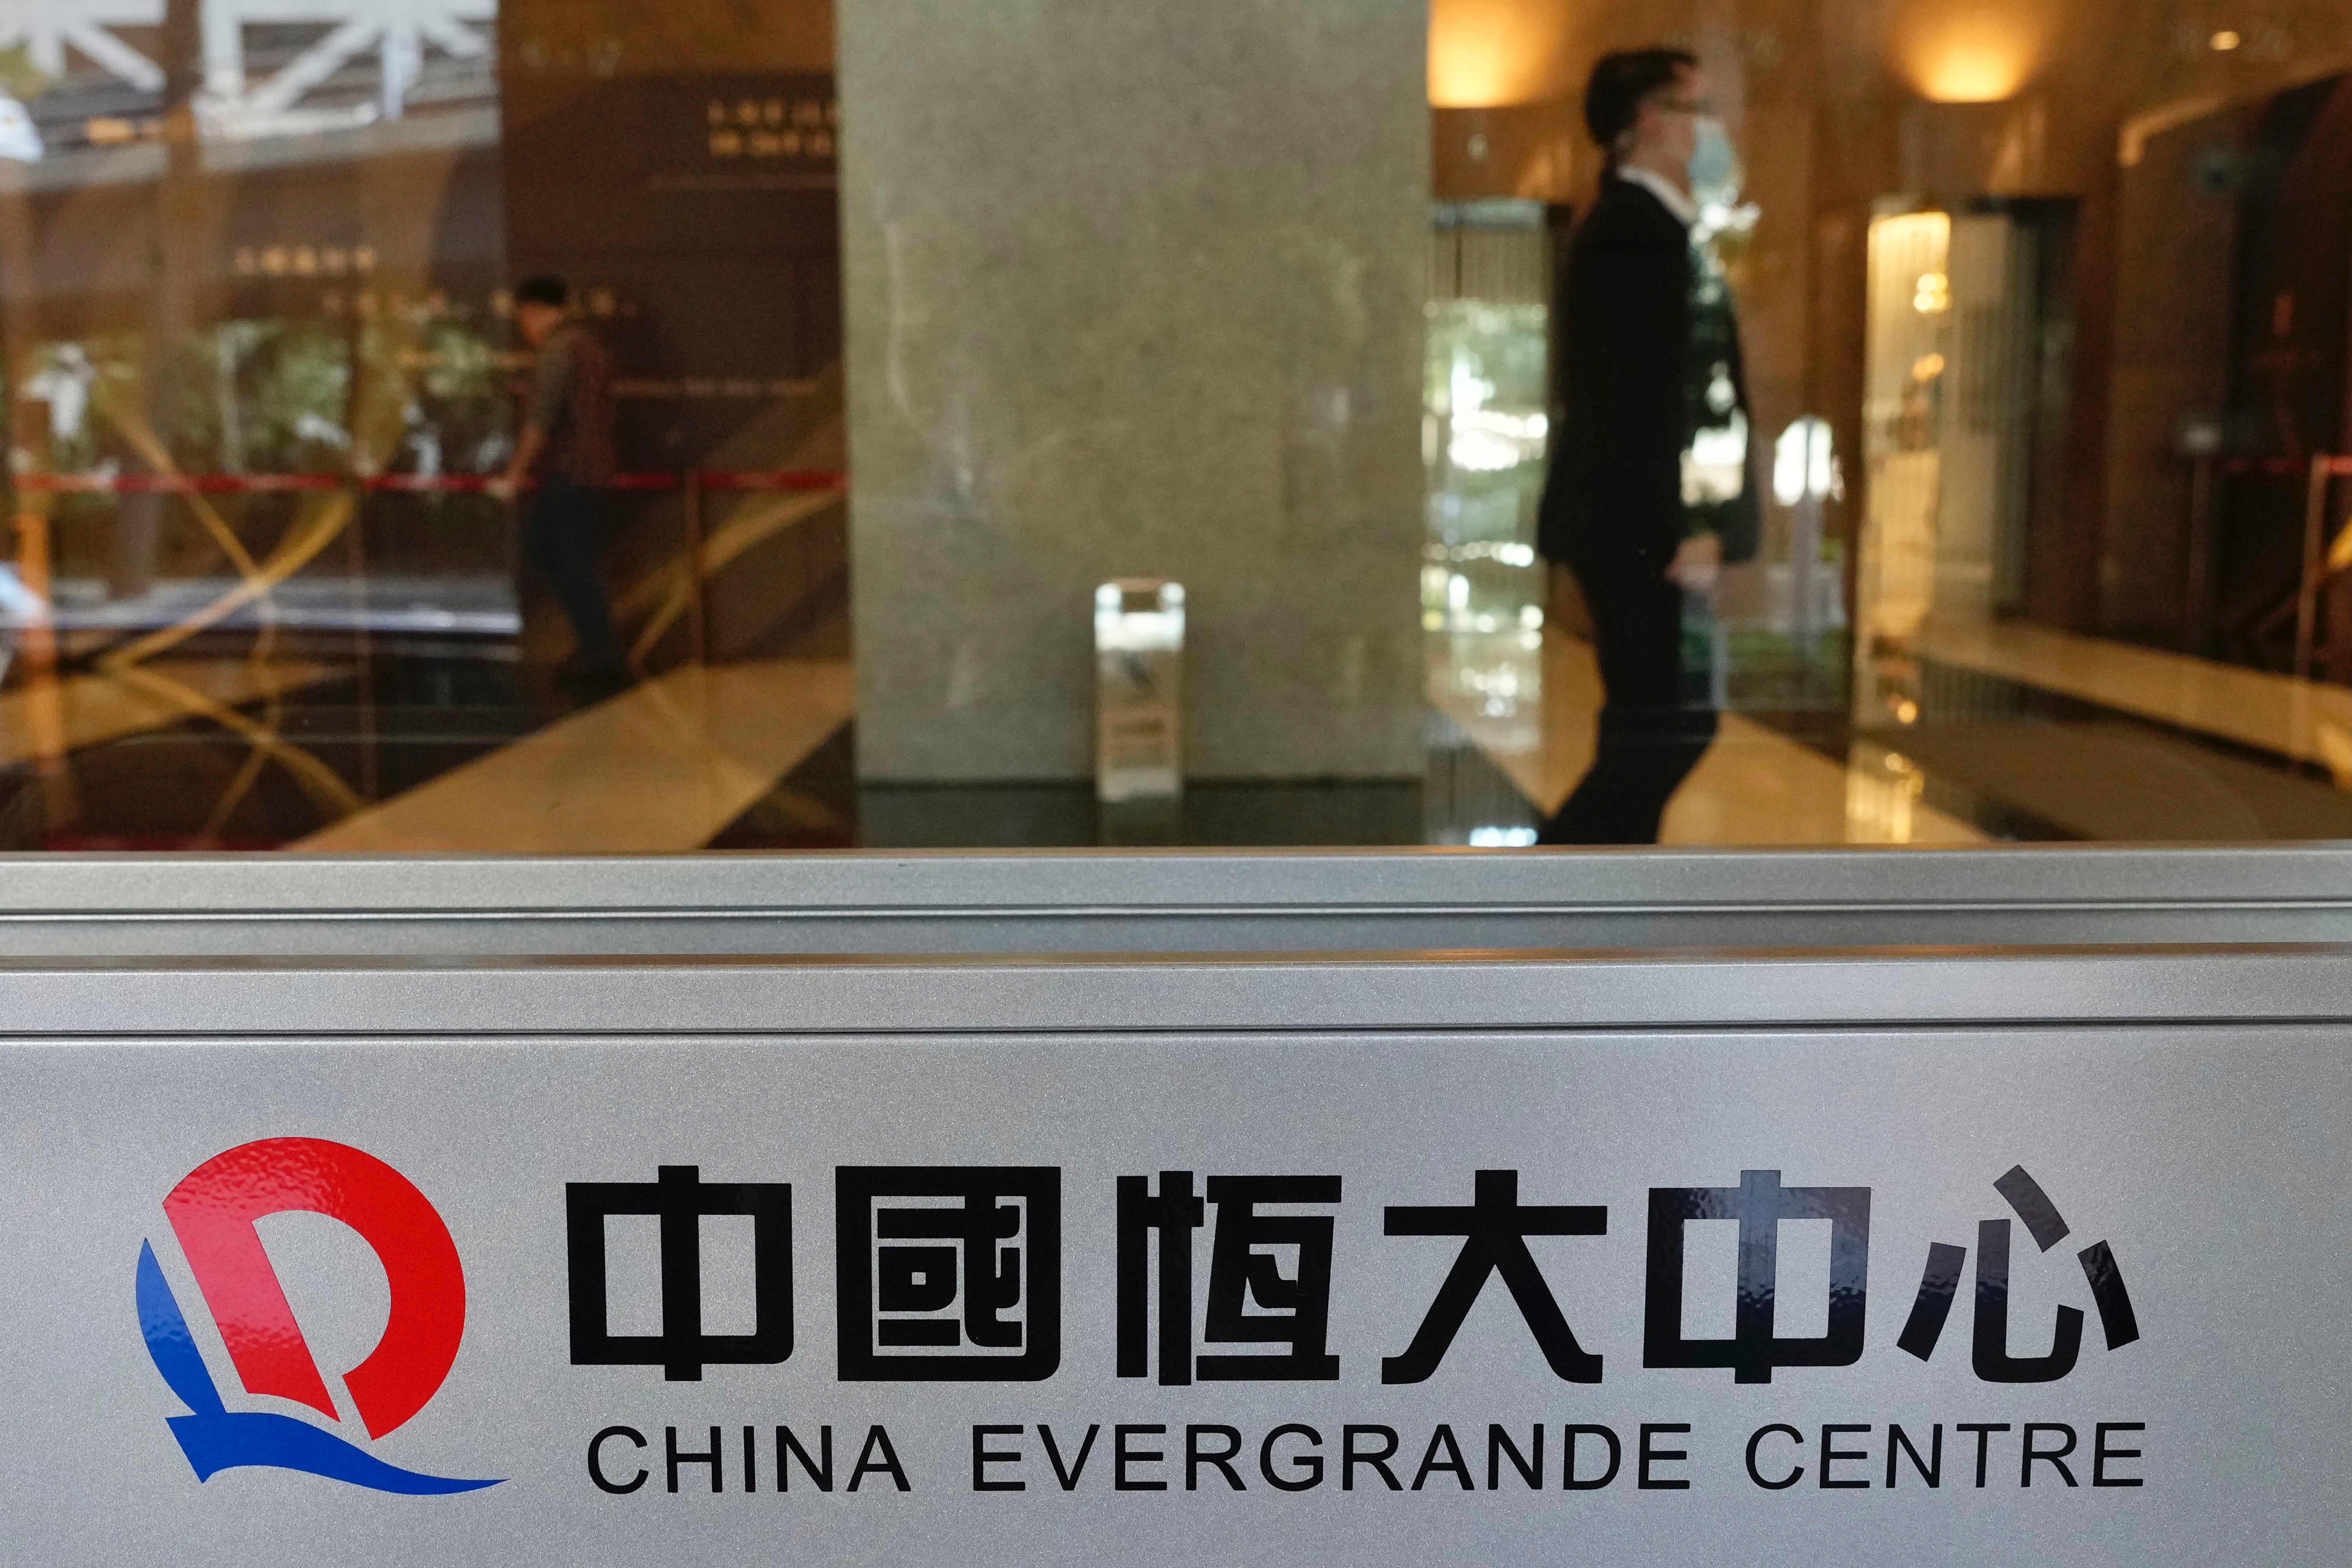 Evergrande is struggling with a $300bn debt